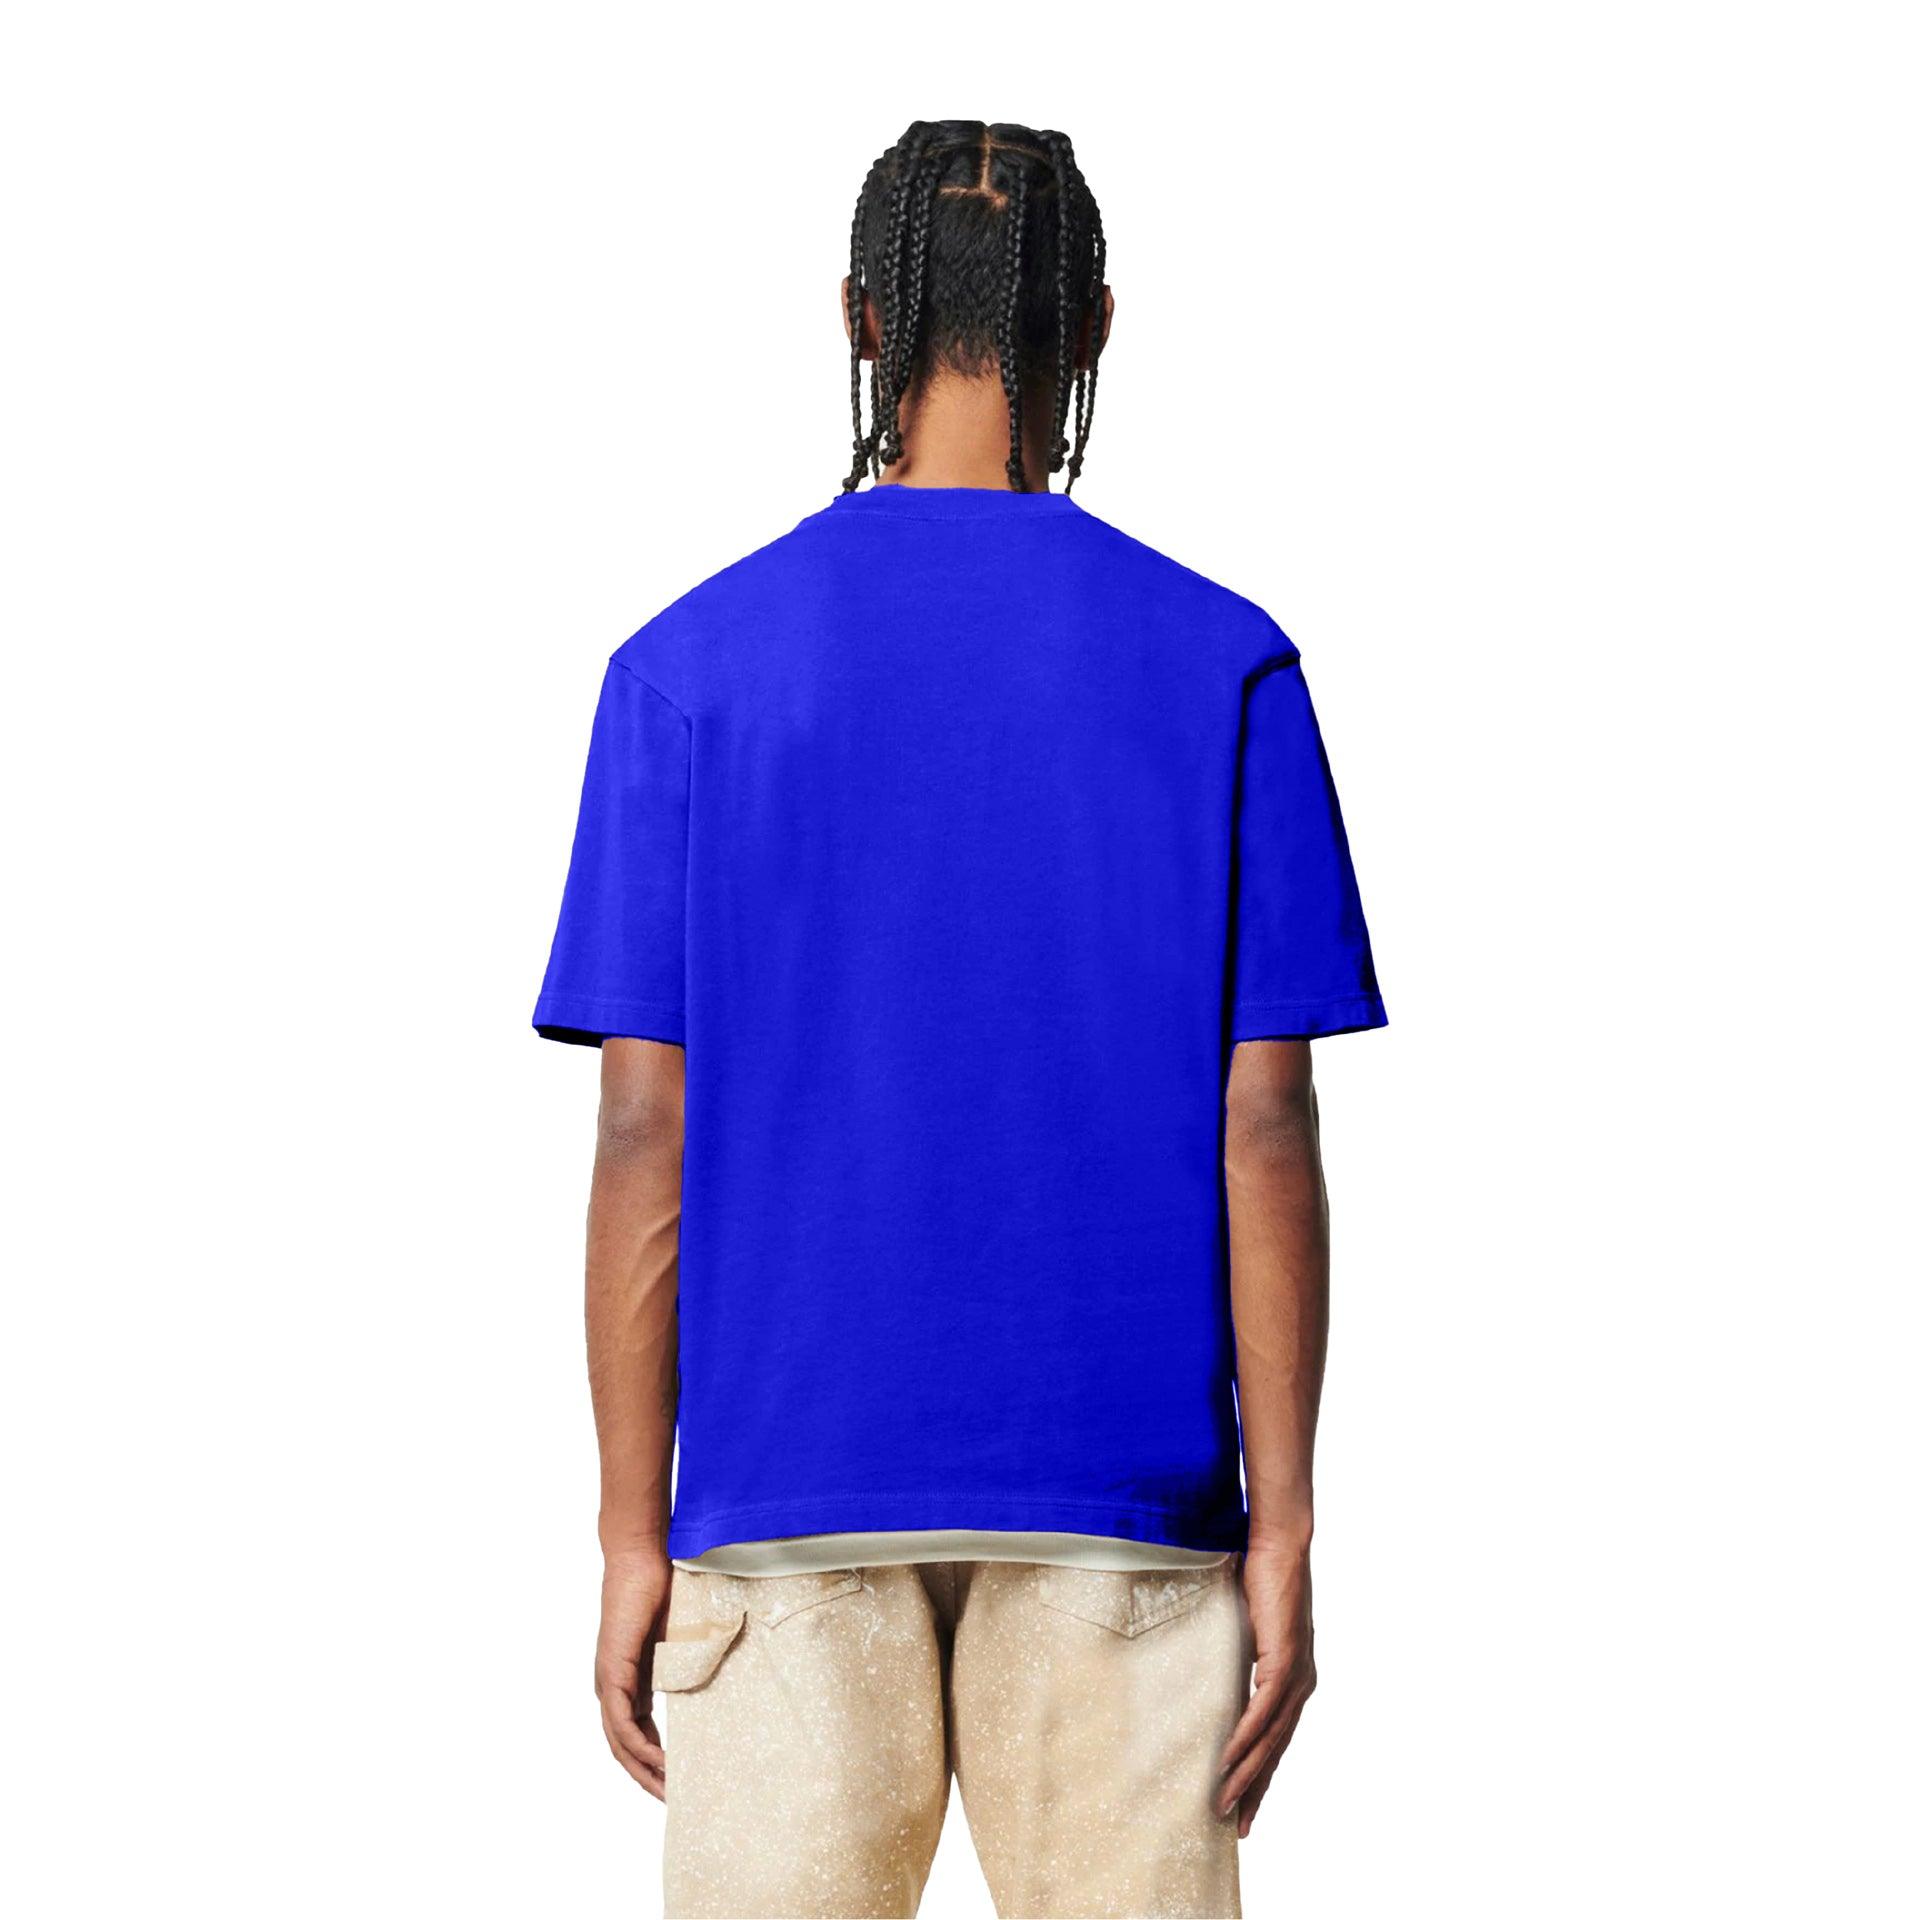 Blue T-shirt From I'm West - WECRE8